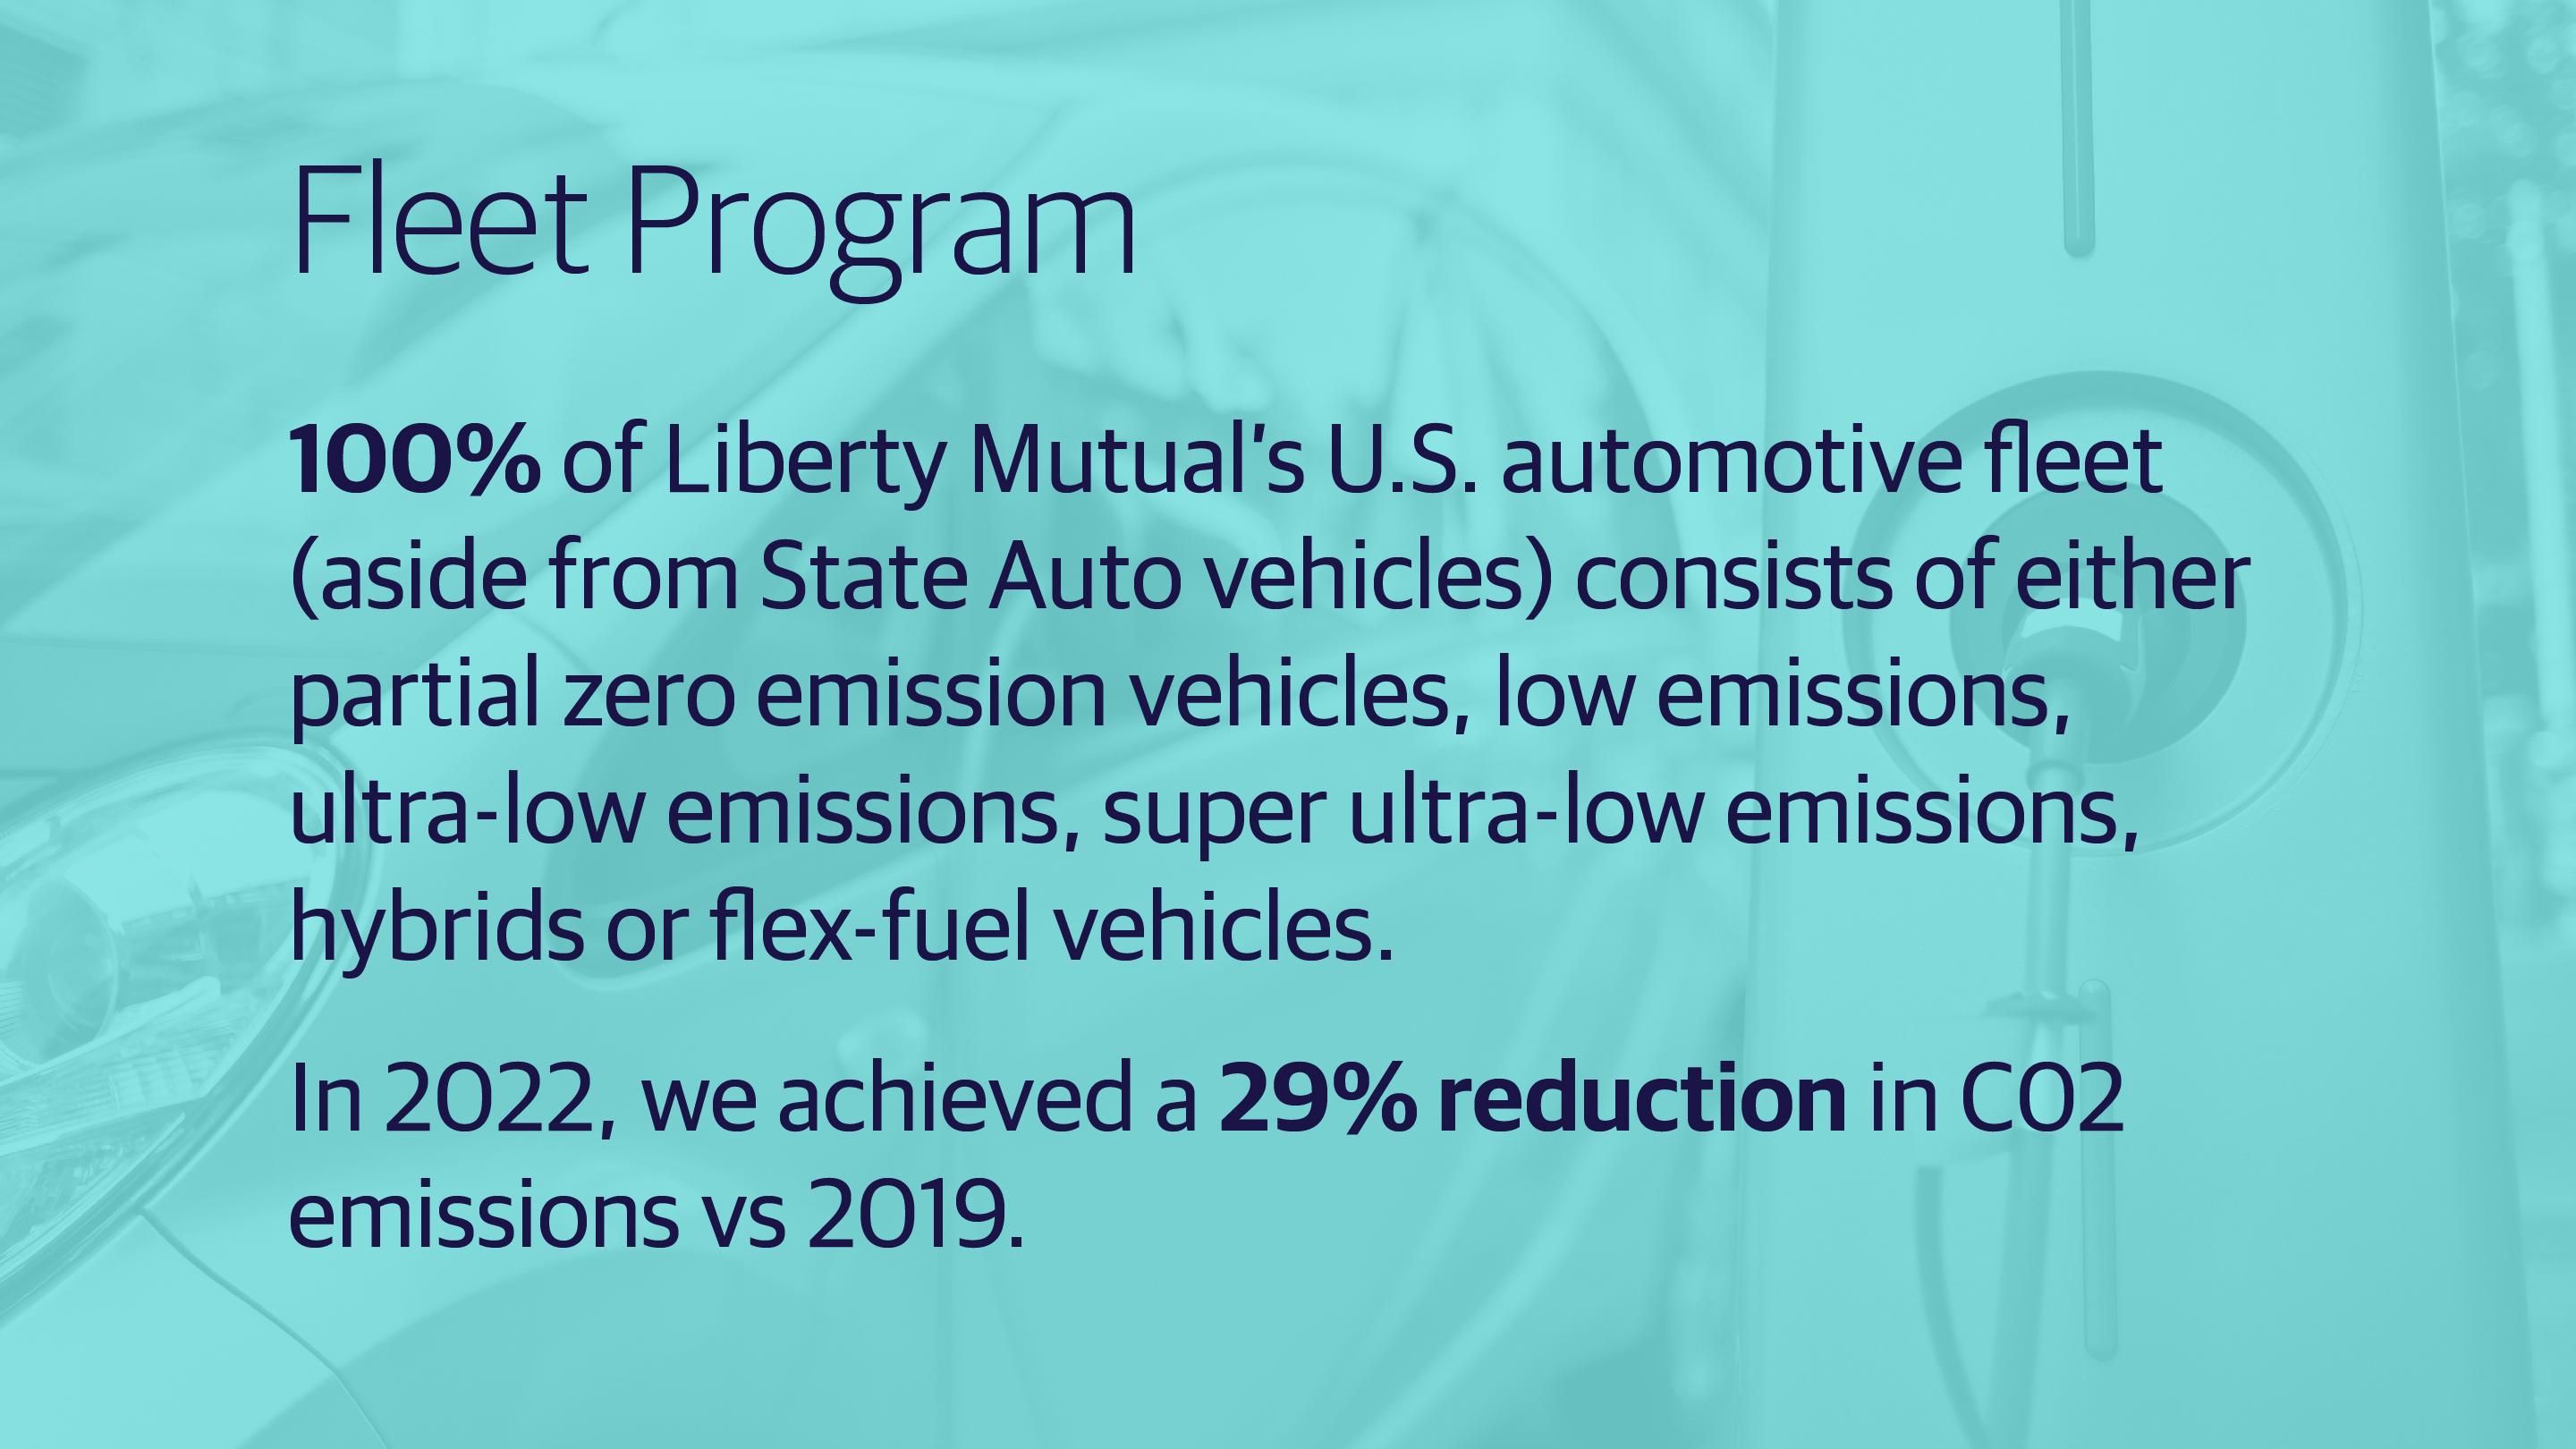 (slide 1 of 3) •	“100% of Liberty Mutual’s U.S. automotive fleet (aside from State Auto vehicles) consists of either partial zero emission vehicles, low emissions, ultra-low emissions, super ultra-low emissions, hybrids or flex-fuel vehicles. In 2022, we achieved a 29% reduction in CO2 emissions vs 2019.”. 